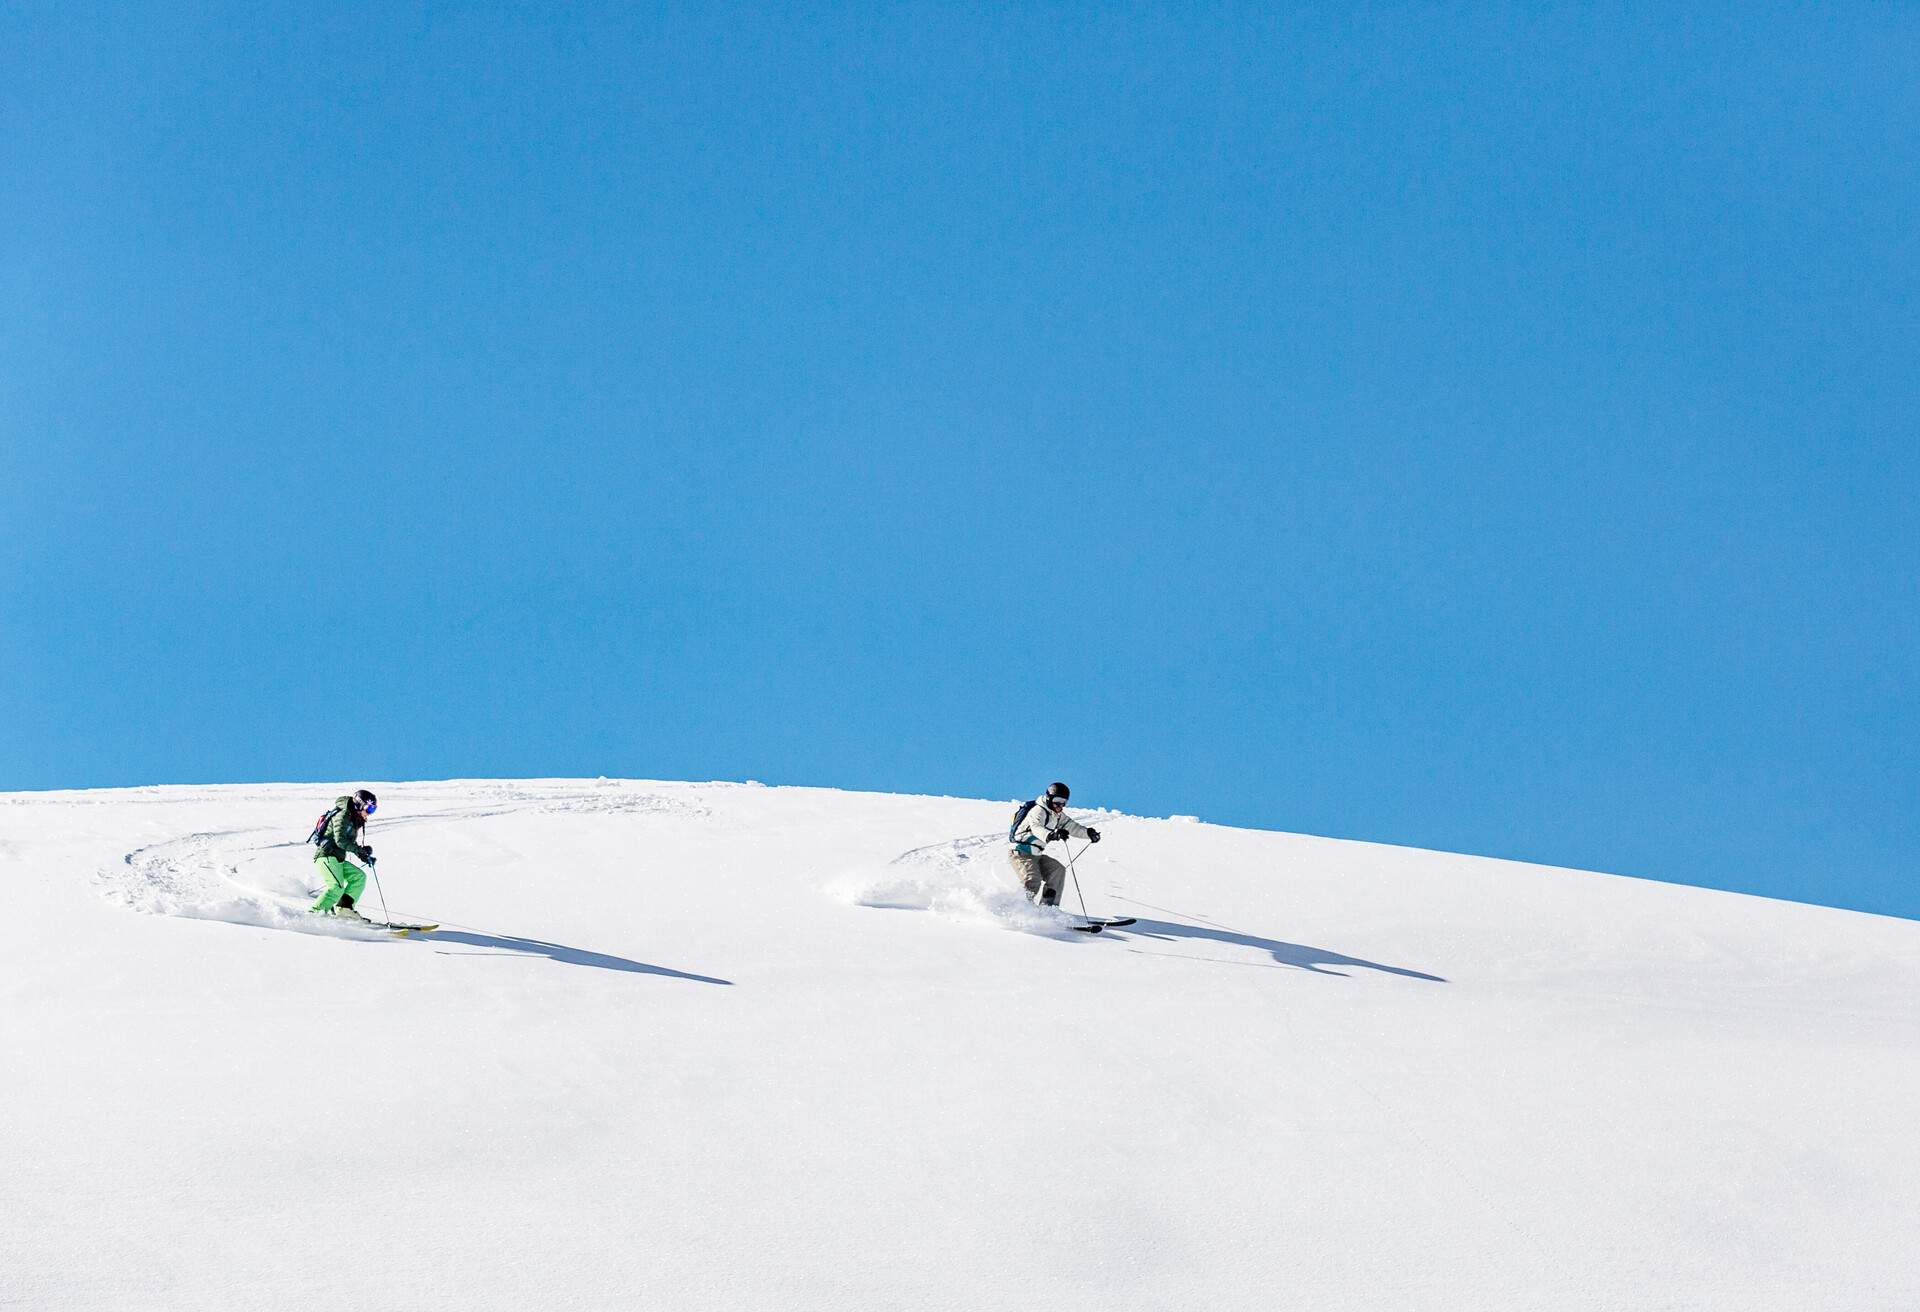 Two people skiing down an off-piste slope covered in fresh snow under the blue sky.